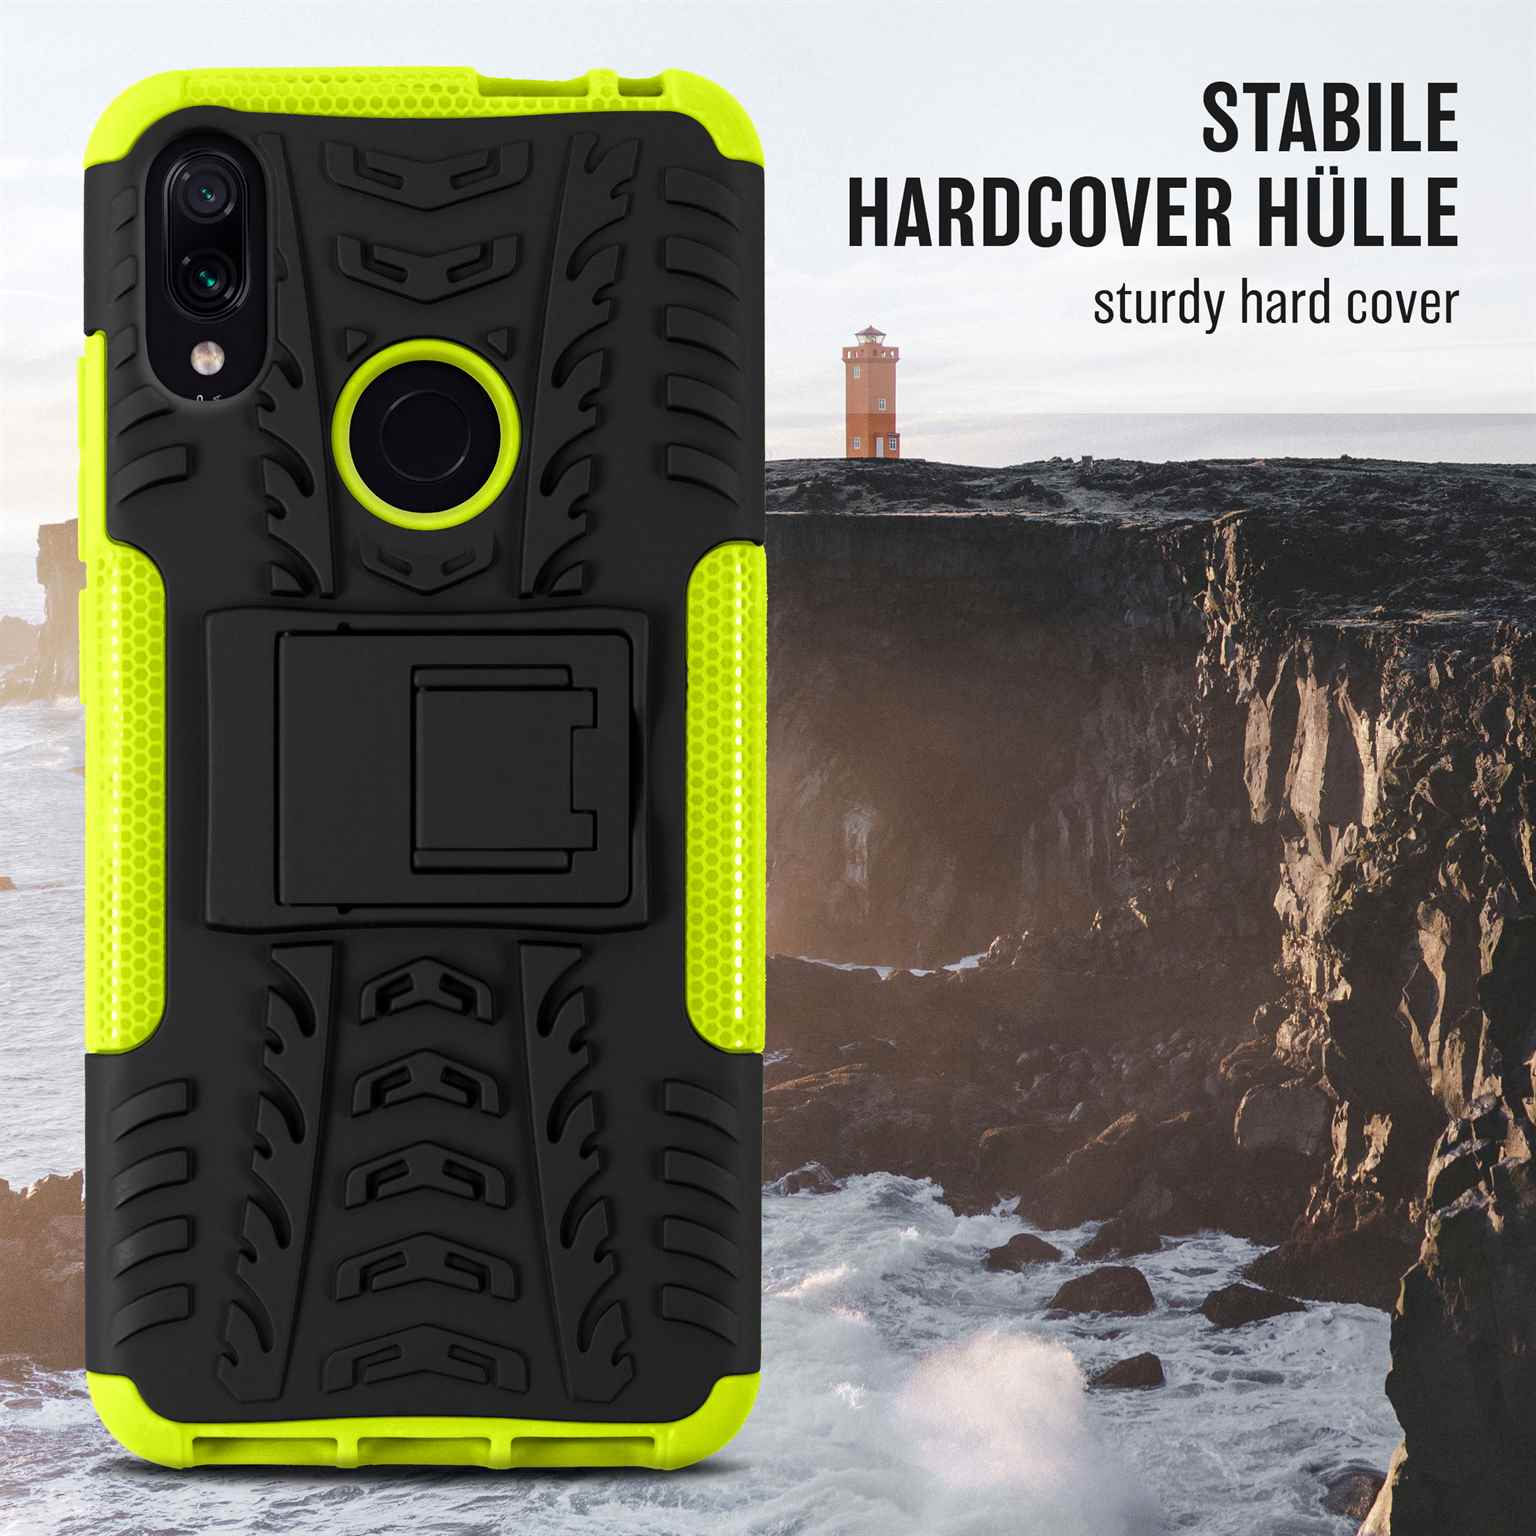 Redmi Note Backcover, Tank 7S, Xiaomi, ONEFLOW Case, Lime